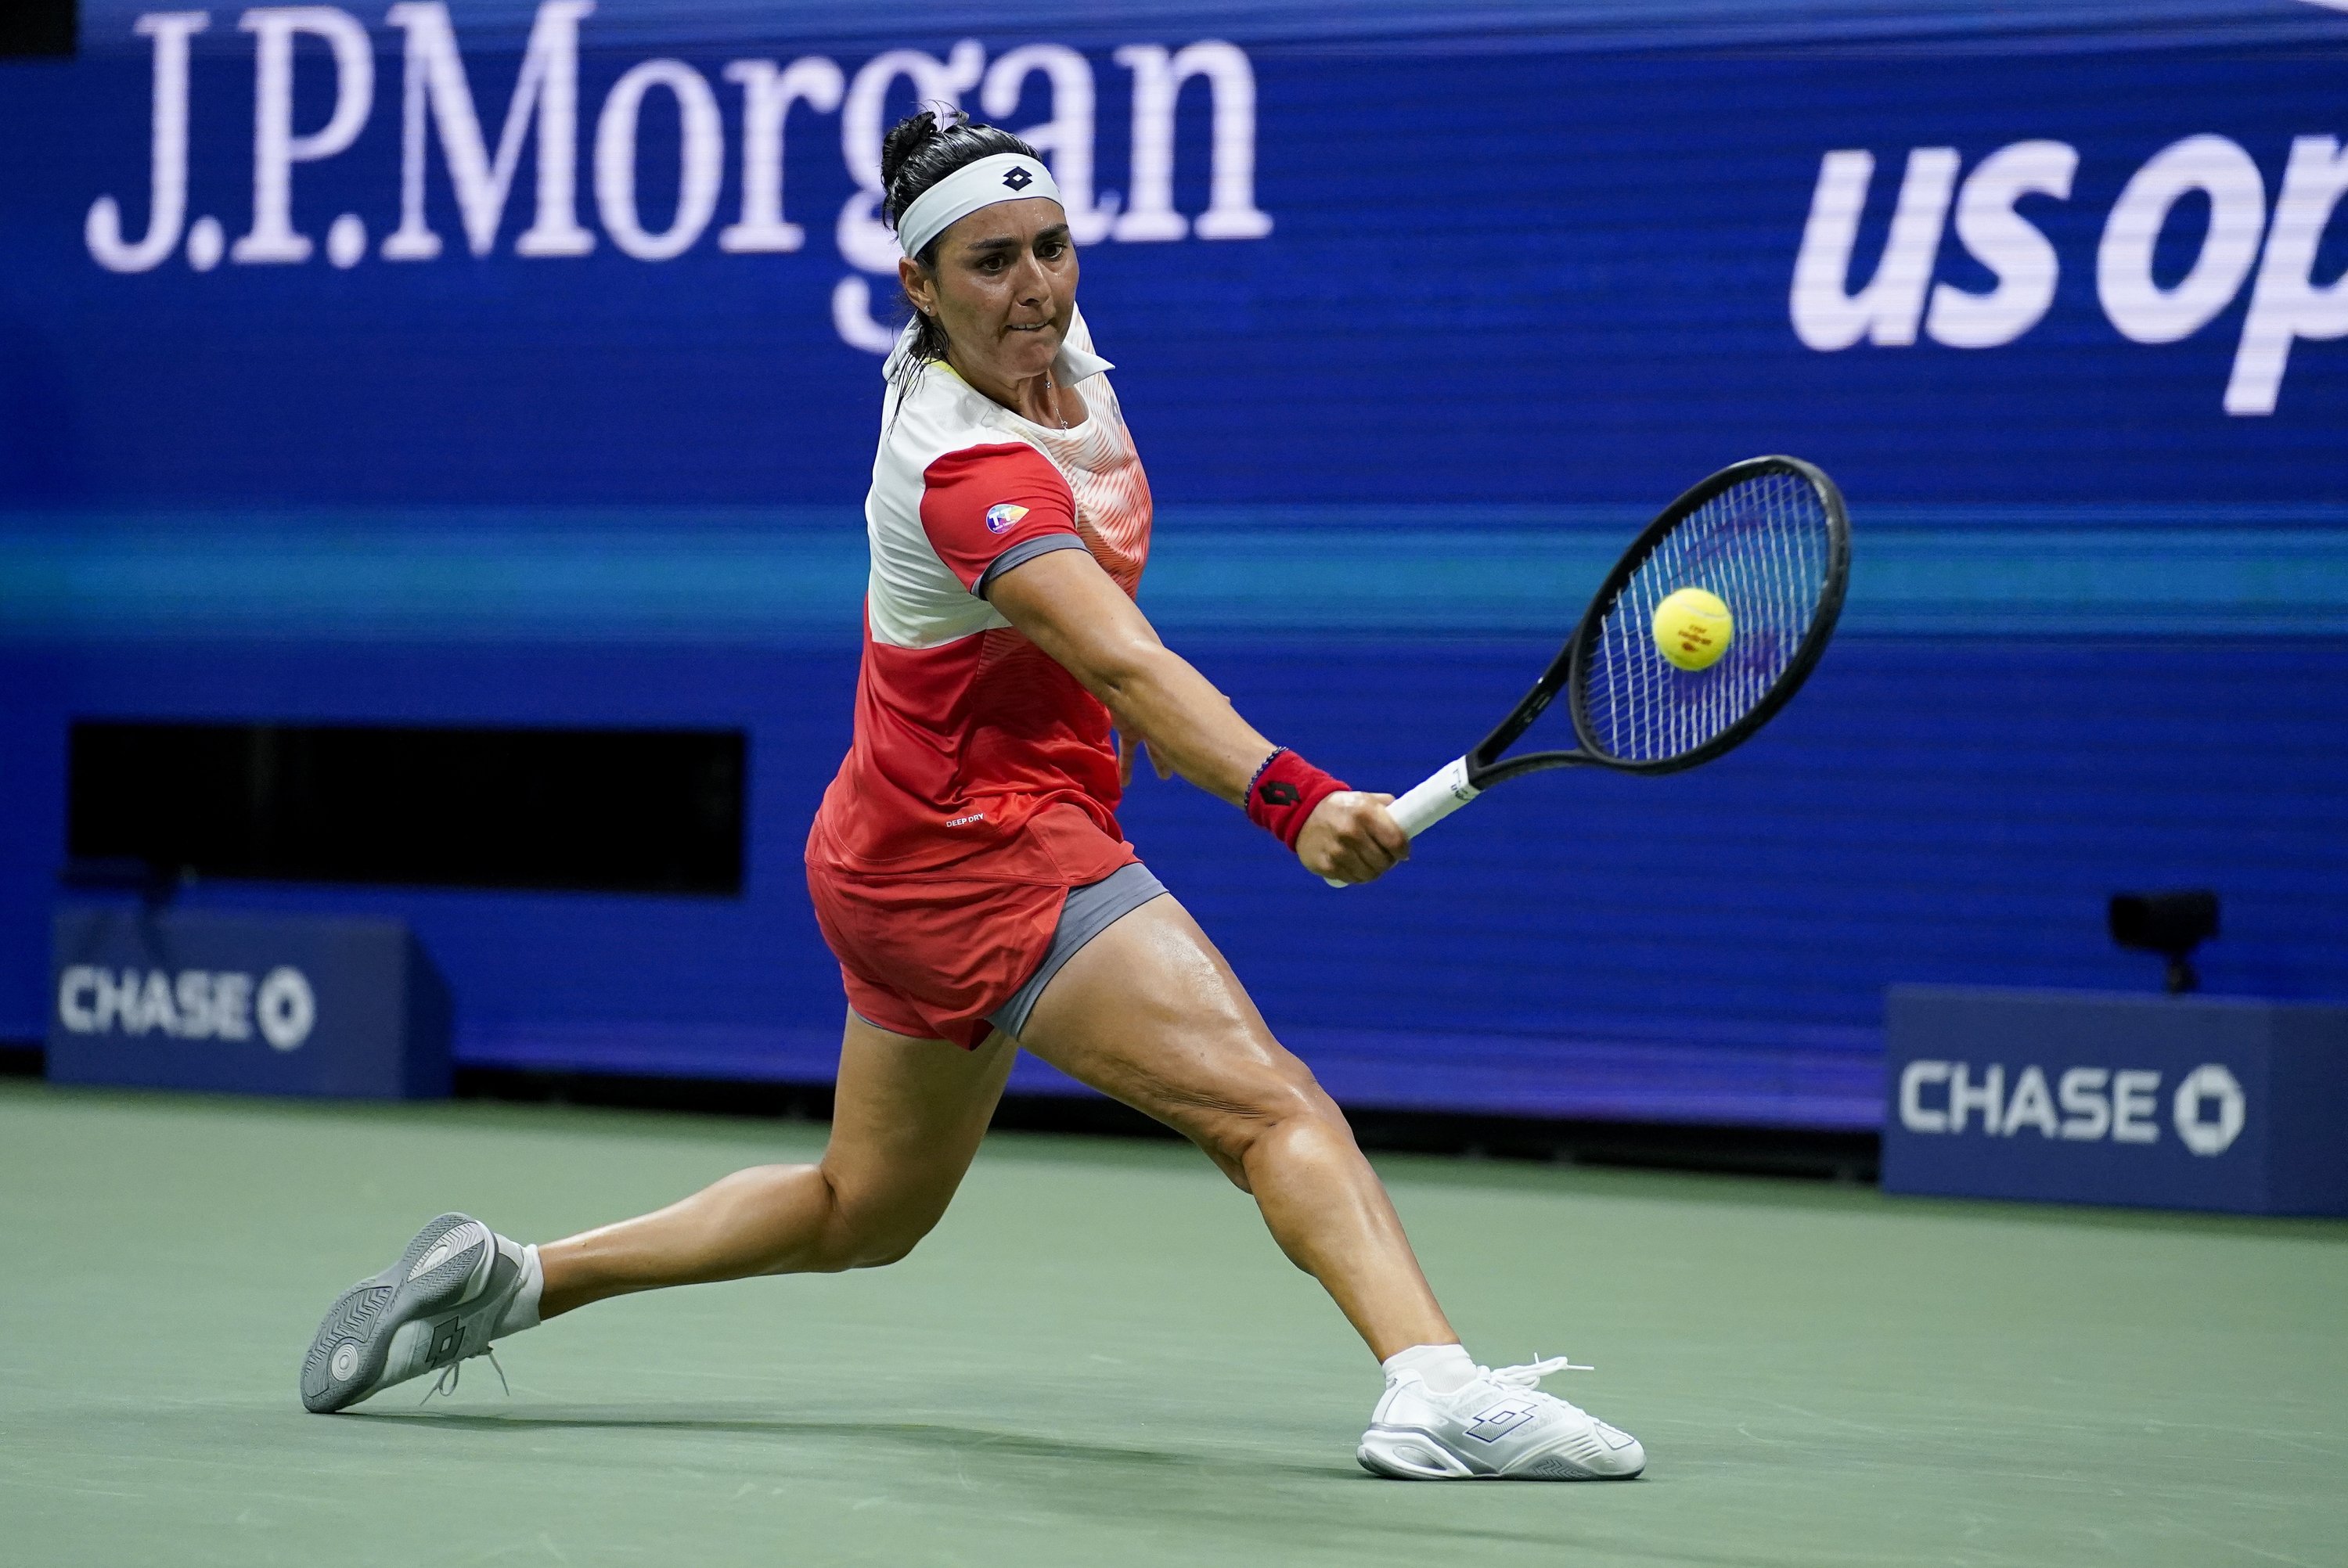 Ons Jabeur plays against Ajla Tomljanovic in the U.S. Open quarterfinals, New York, U.S., Sept. 6, 2022. (AP Photo)